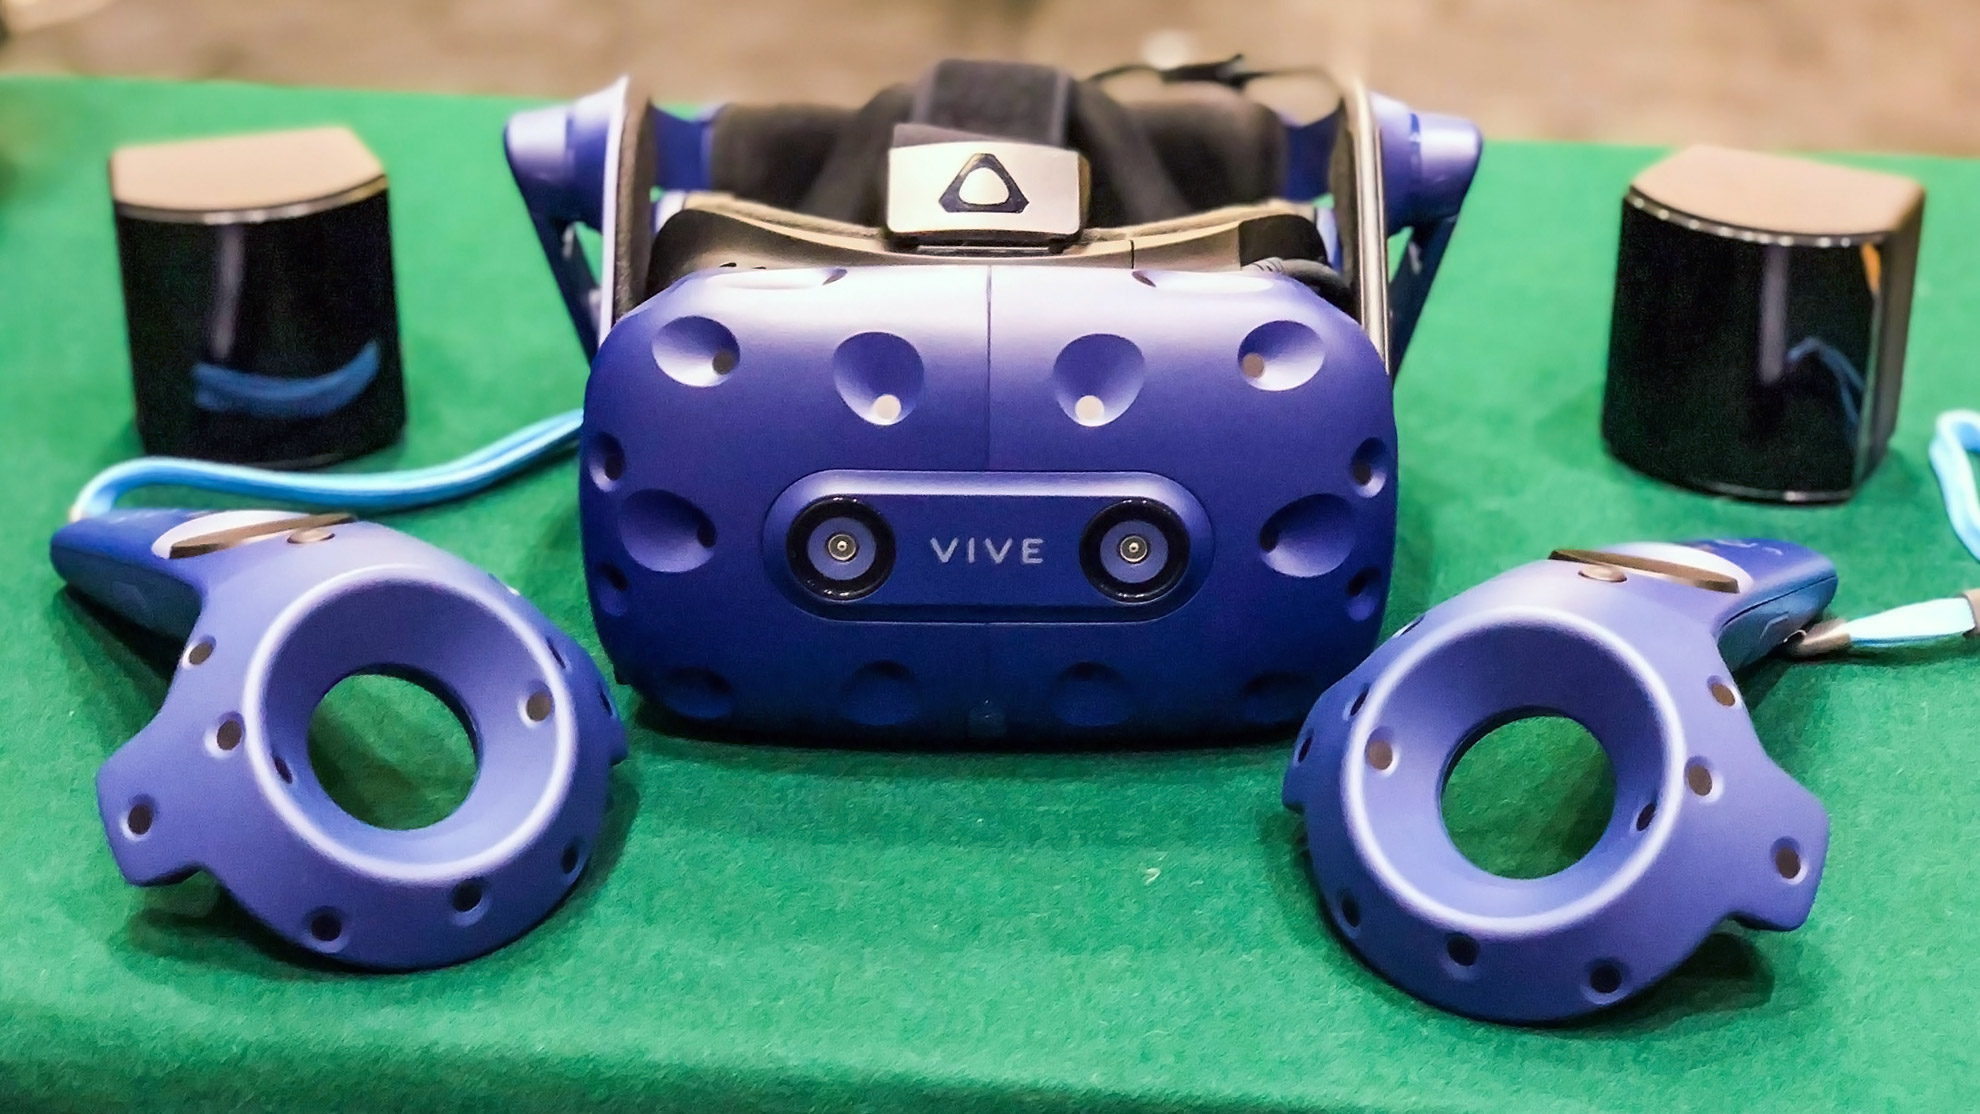 Glimpse the Vive Pro Controllers & SteamVR Tracking 2.0 Base Stations